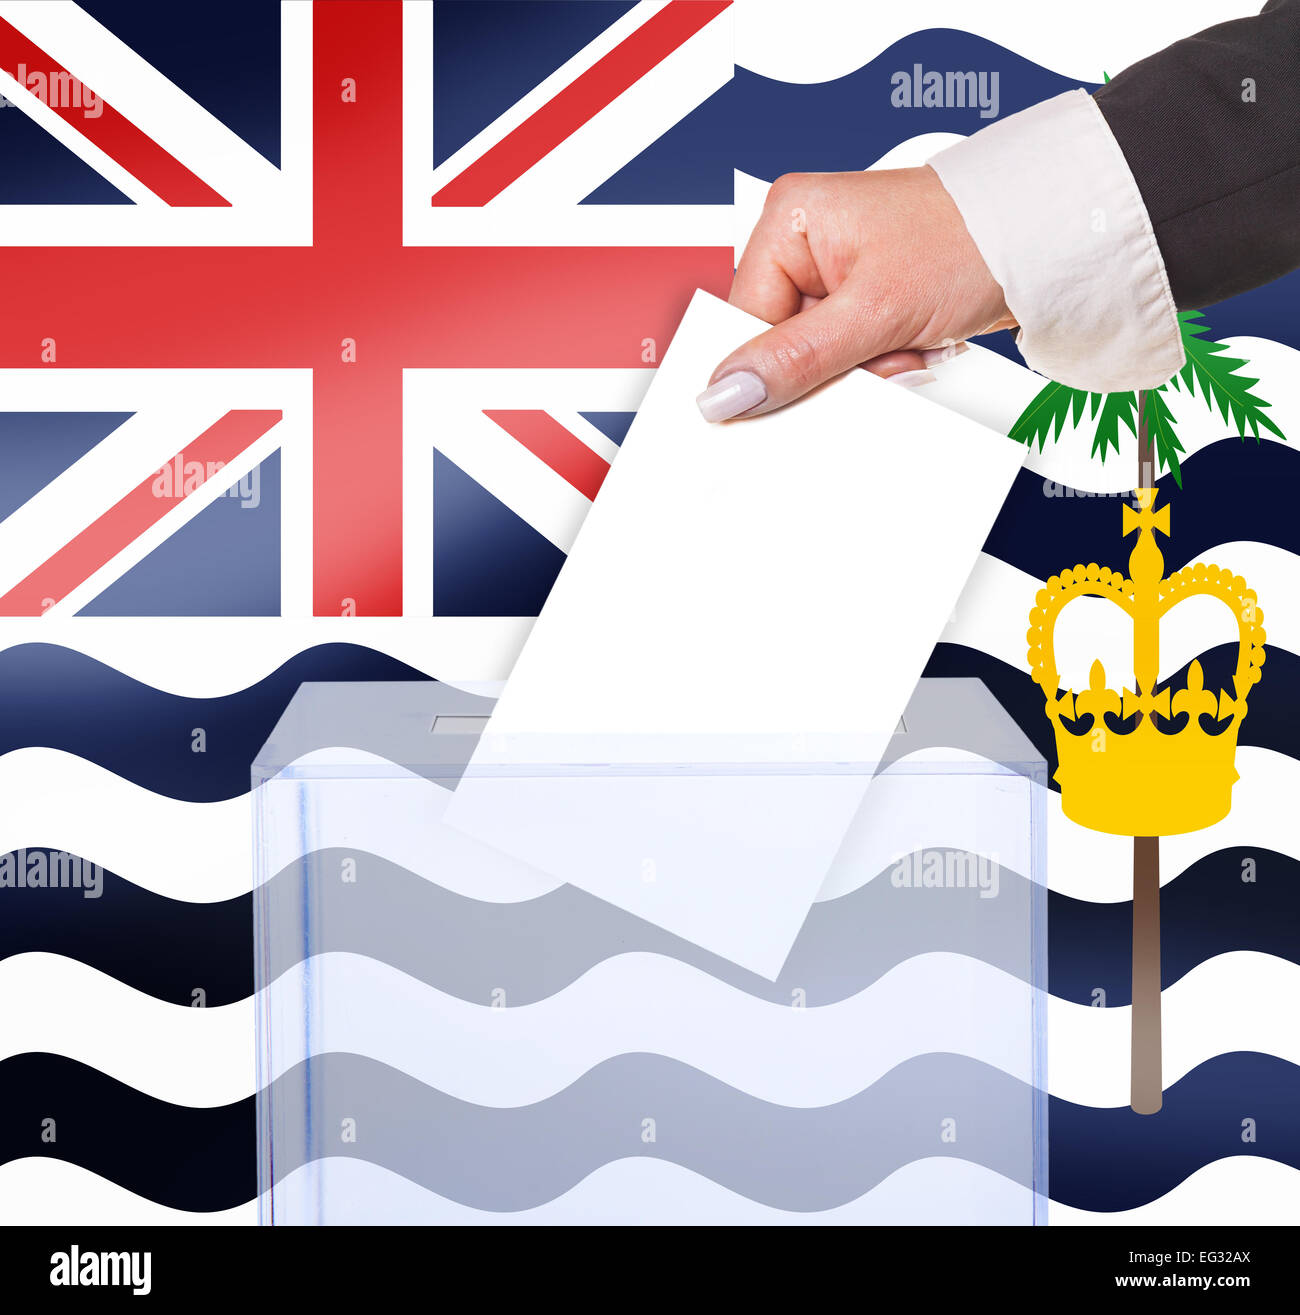 electoral vote by ballot, under the Brit ind Ocean Ter flag Stock Photo